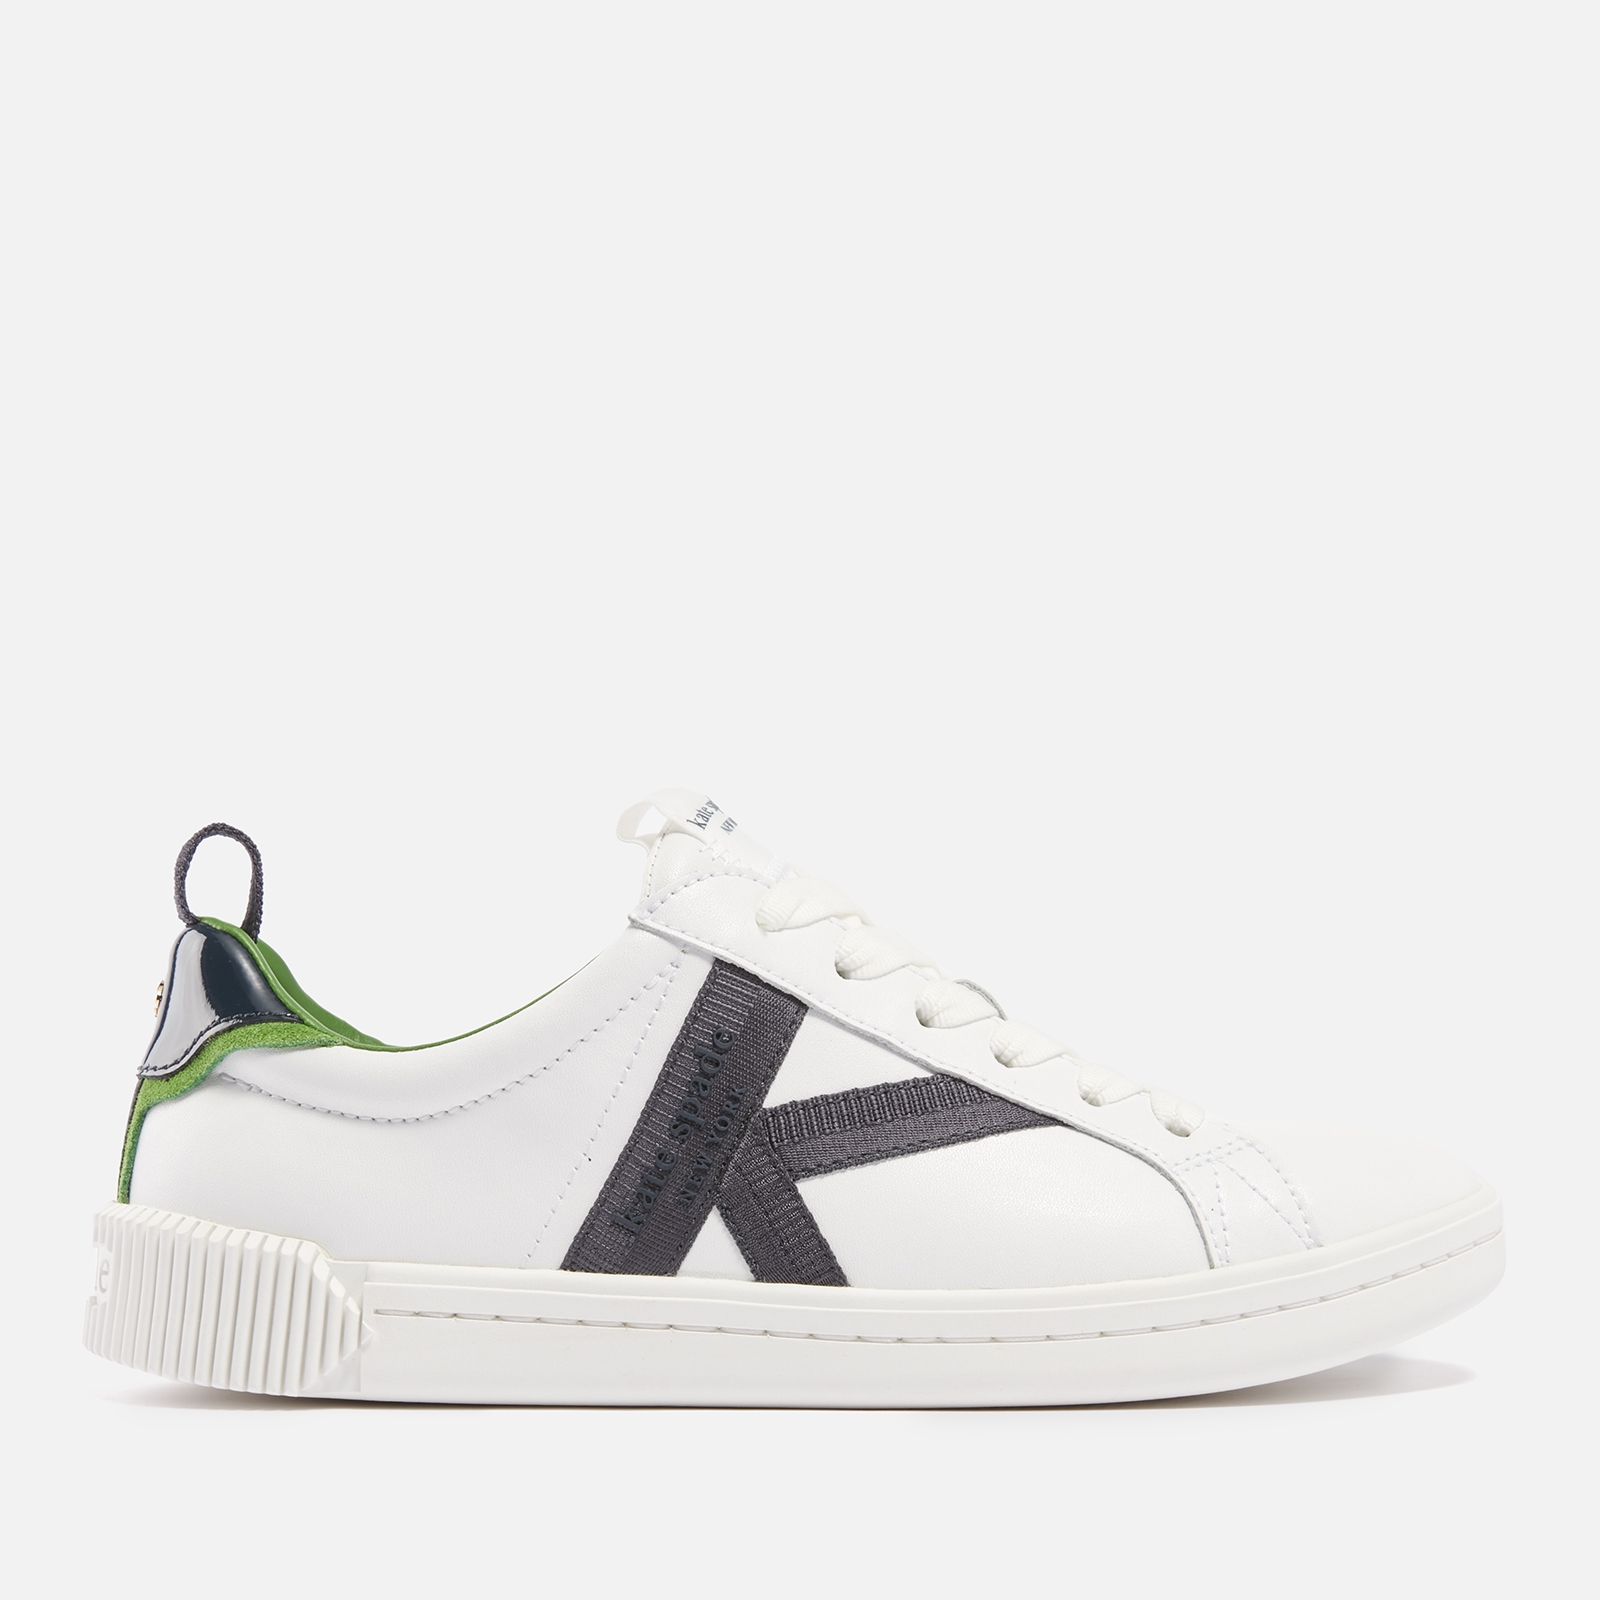 Kate Spade New York Women’s Signature K Leather Cupsole Trainers